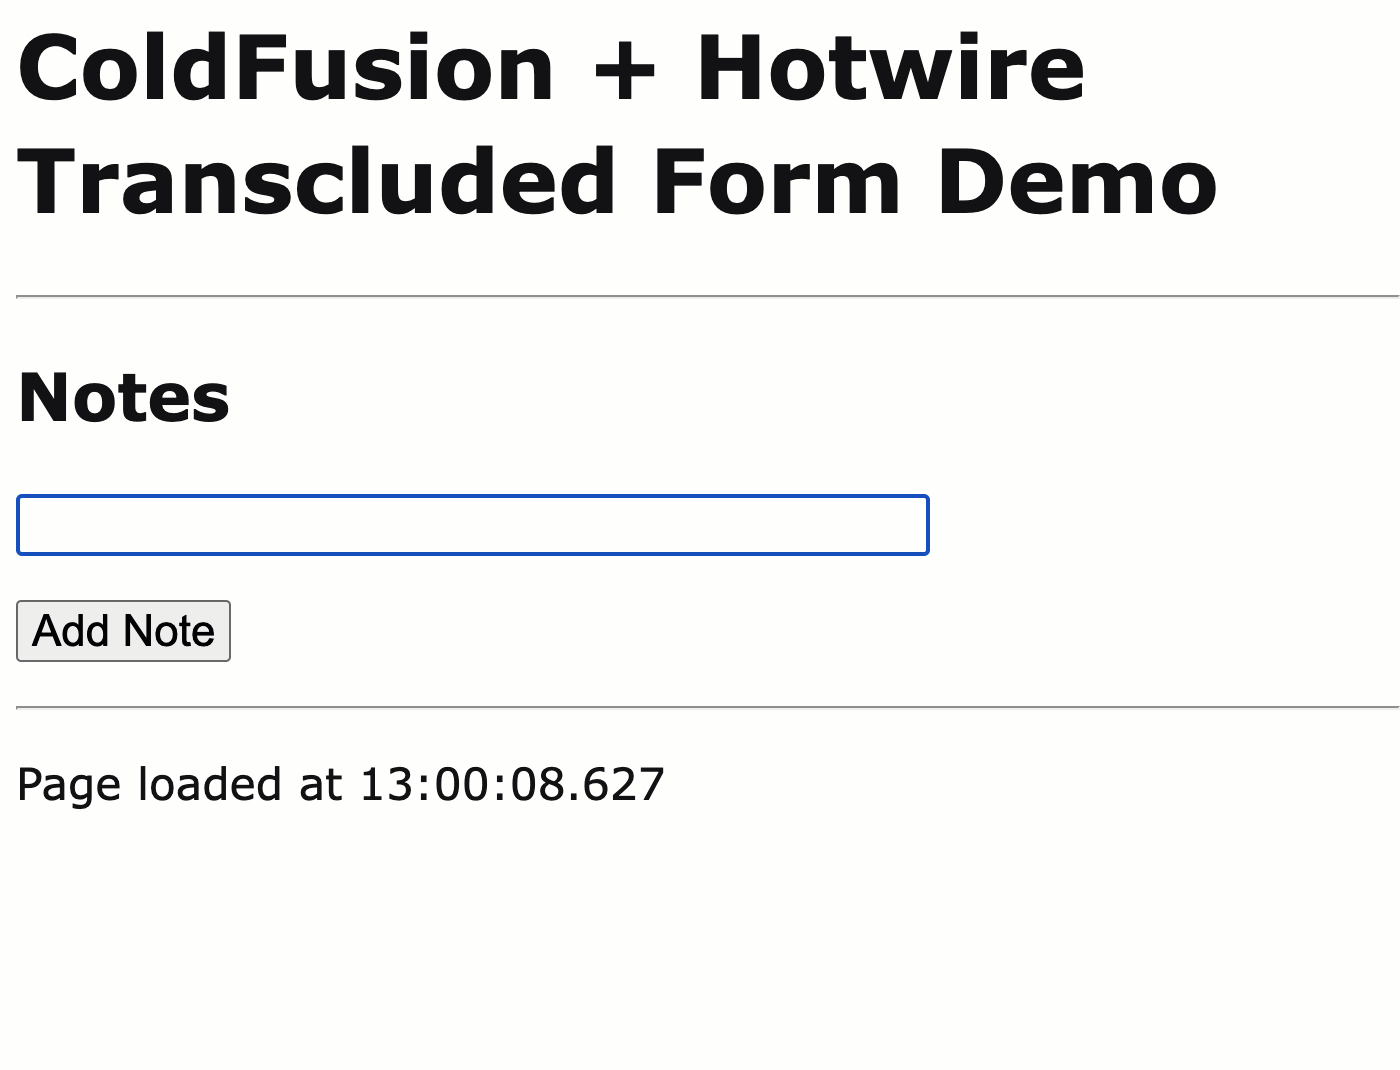 A list of notes being generated from a transcluded form inside a Turbo Frame elmenet in ColdFusion.